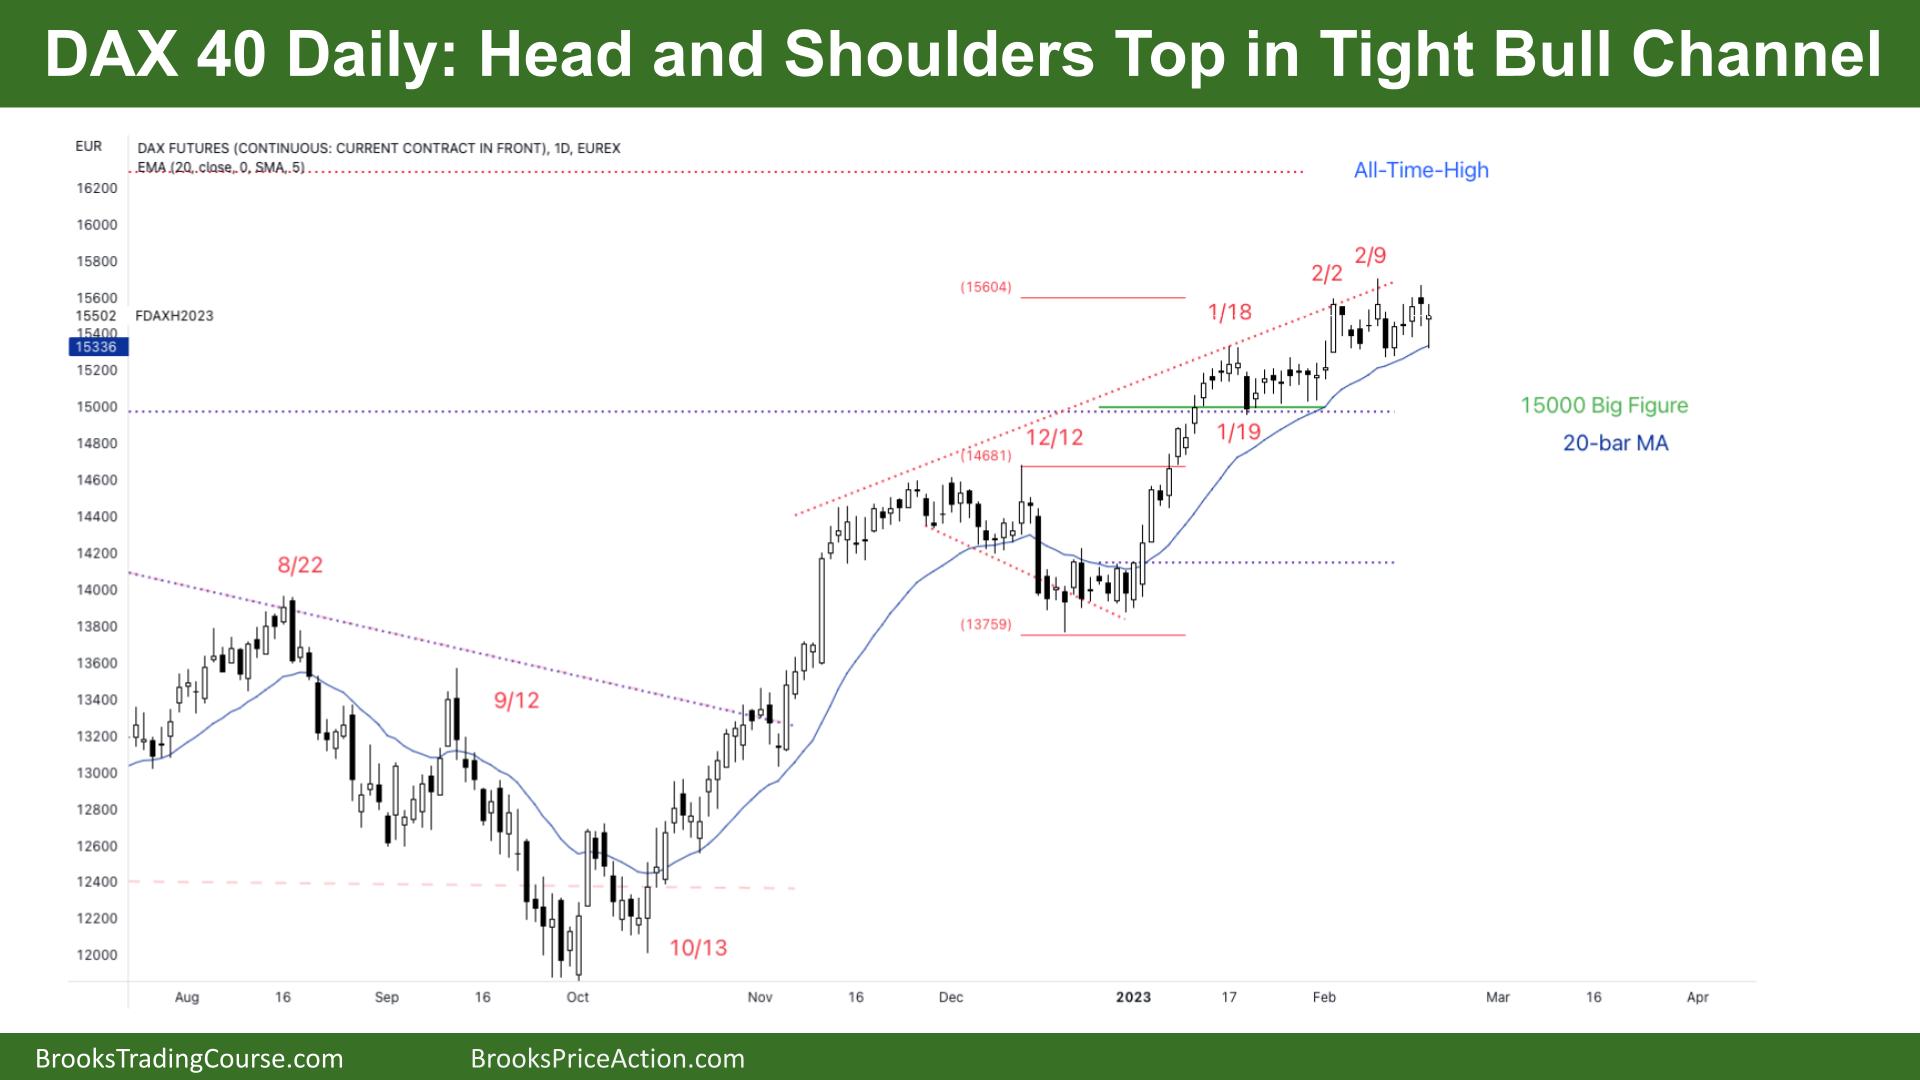 DAX 40 Head and Shoulders Top in Tight Bull Channel